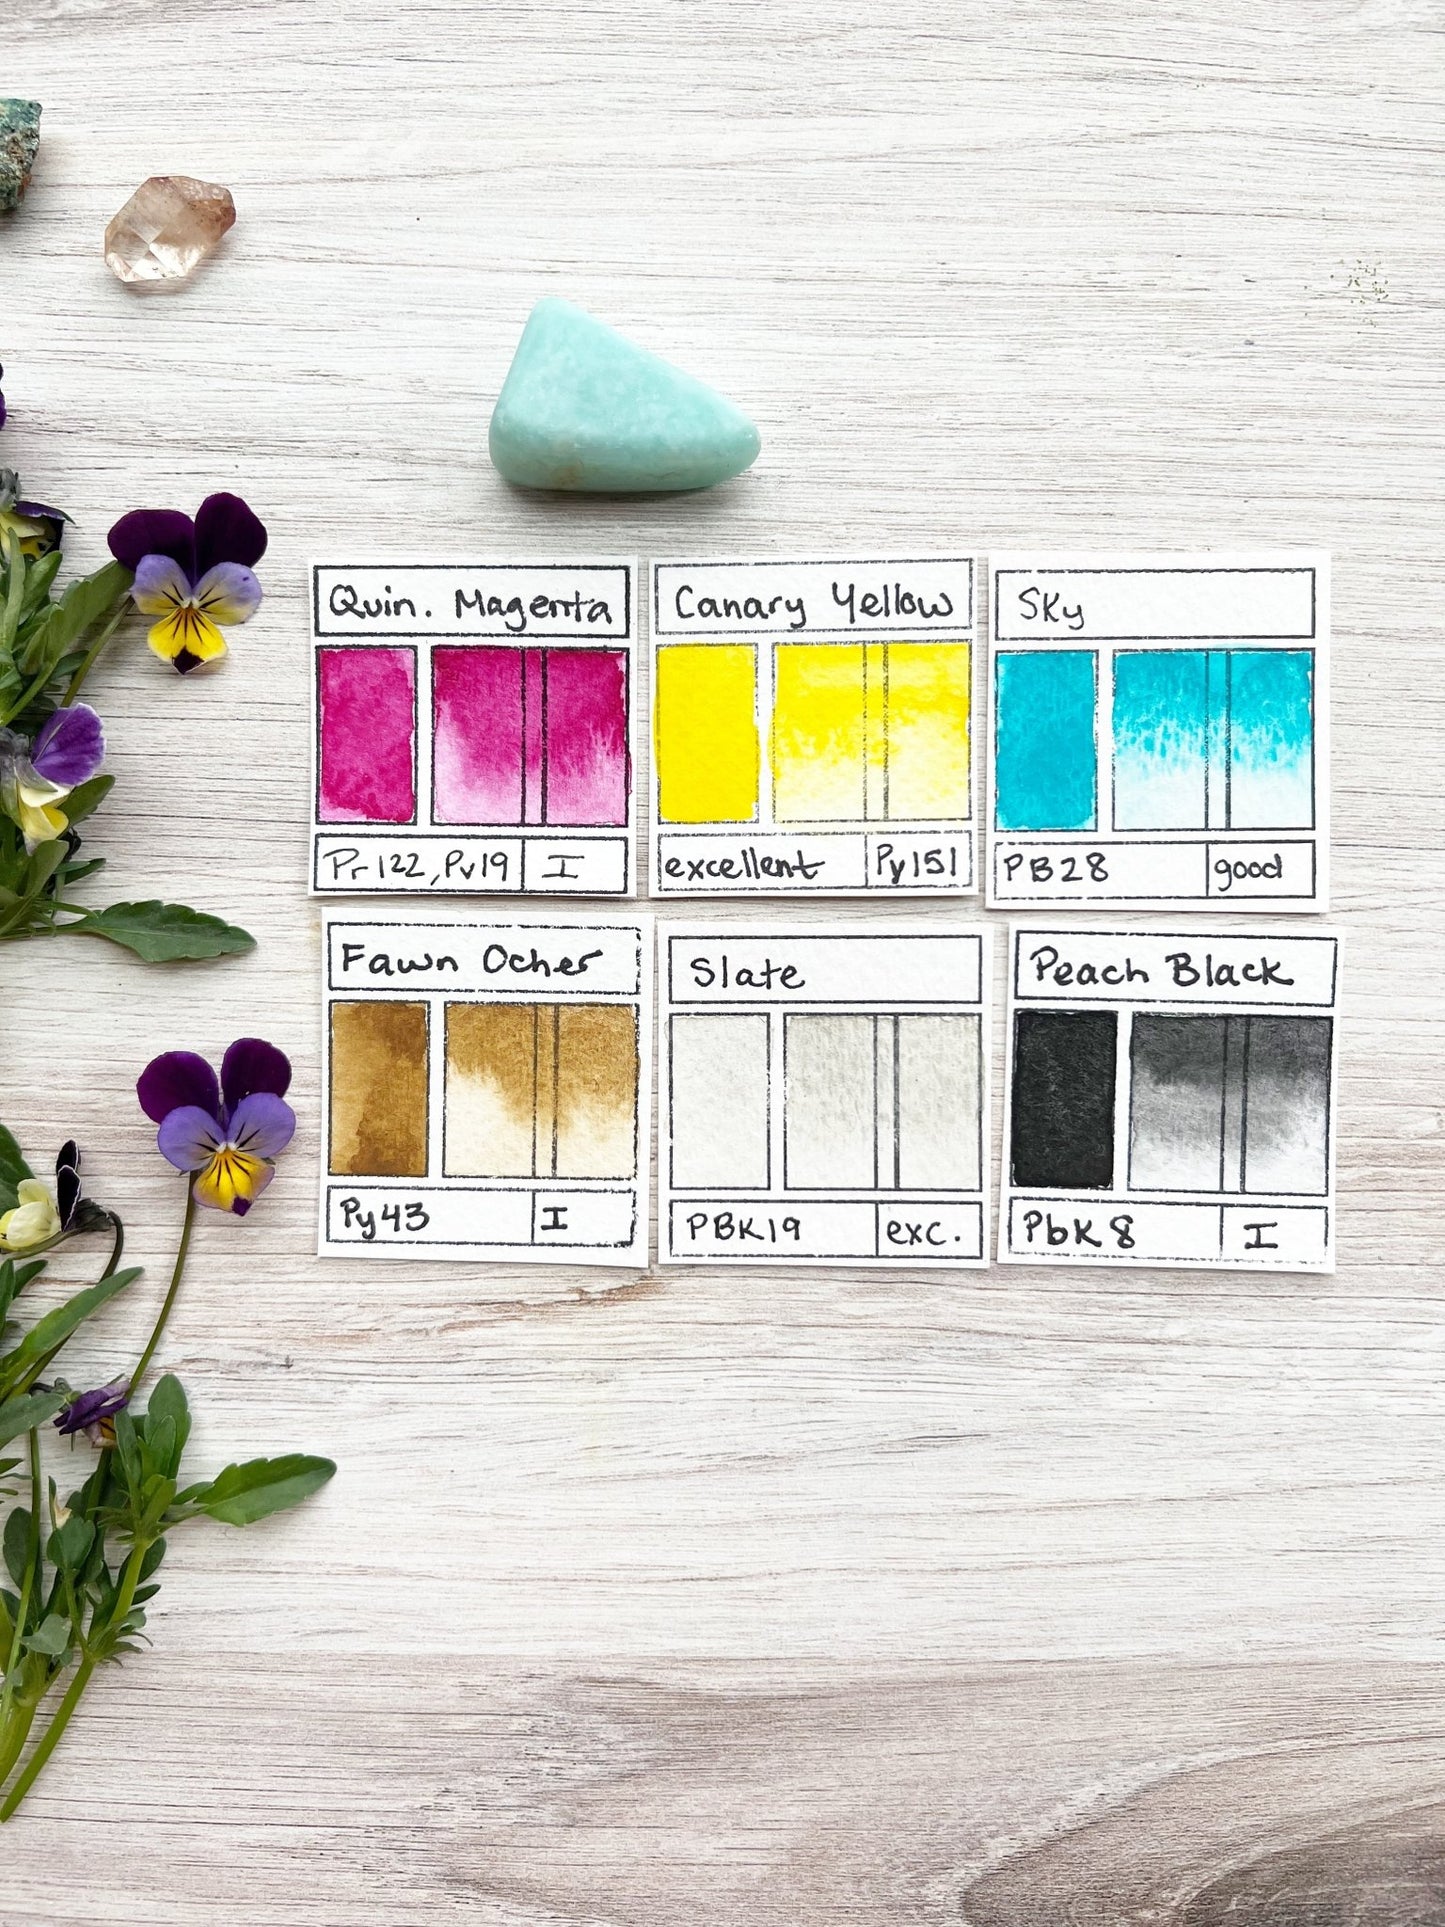 Simple Primary Palette, 6 colors of handmade paint in a travel tin - Ruby Mountain